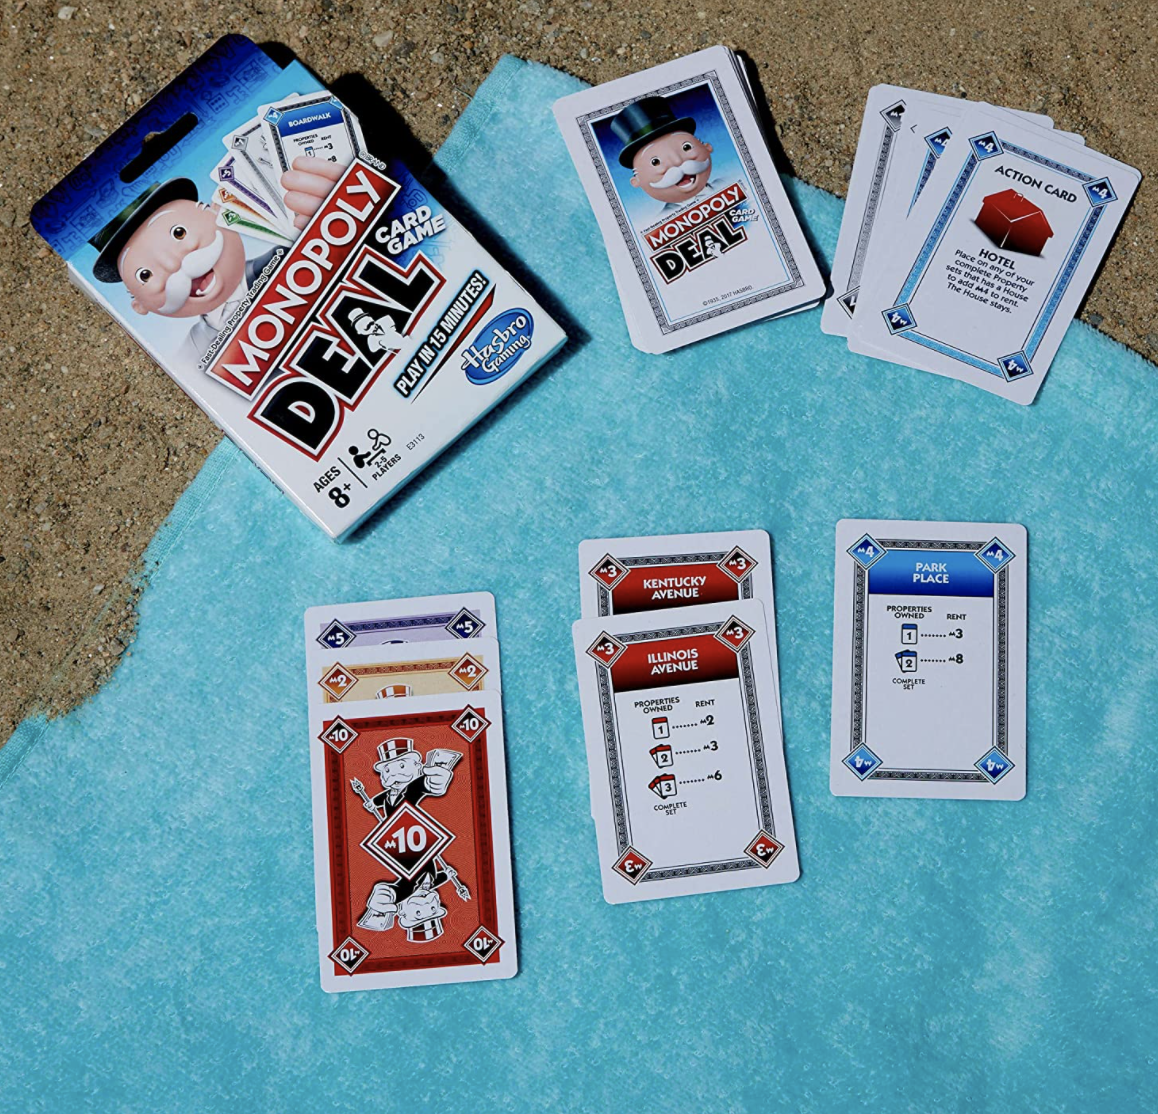 Monopoly card game on beach towel